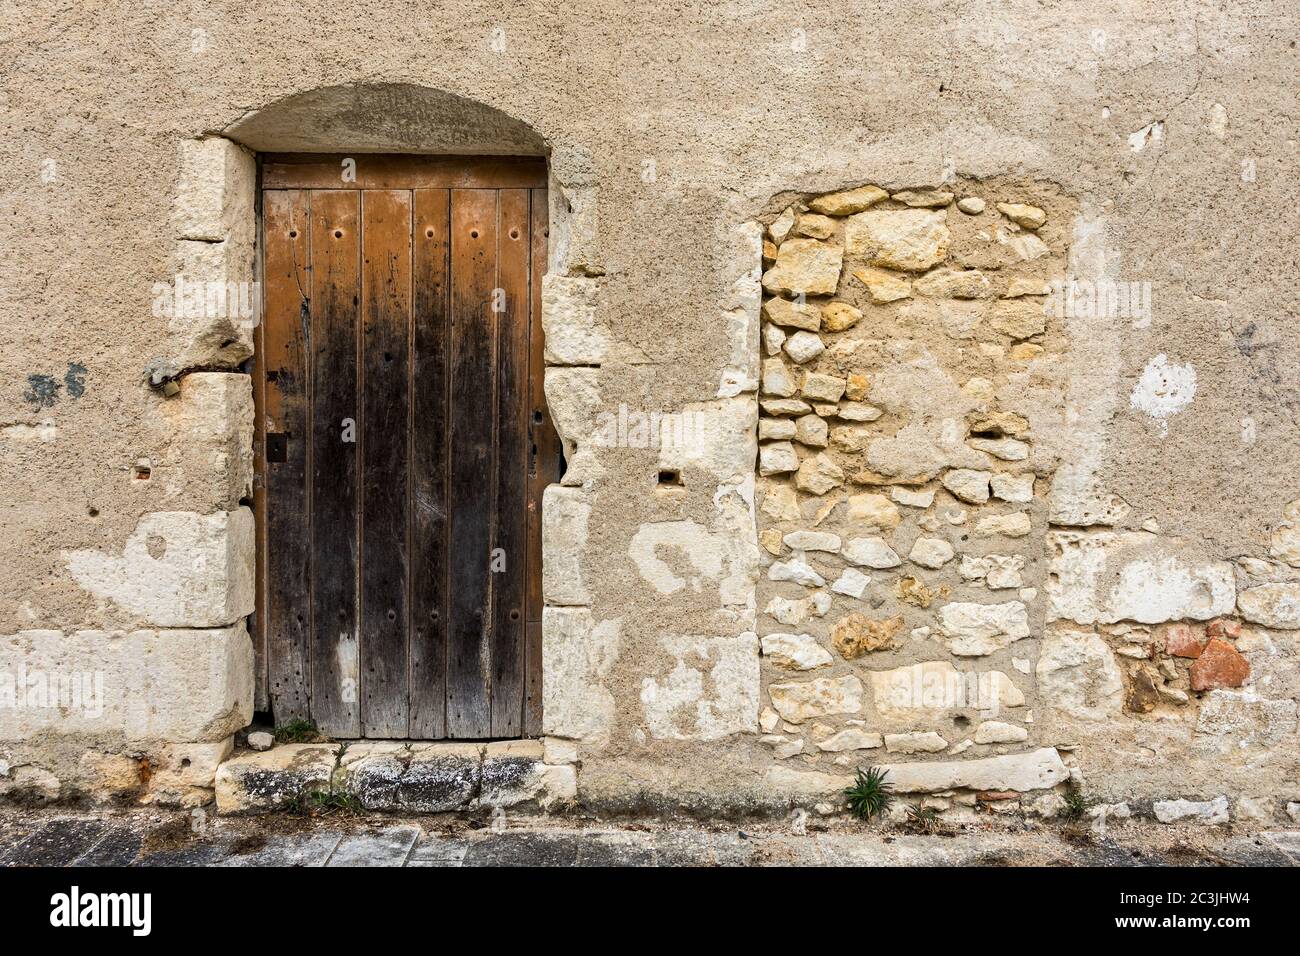 Old blocked and newer entrance doorways - Le Blanc, Indre, France. Stock Photo